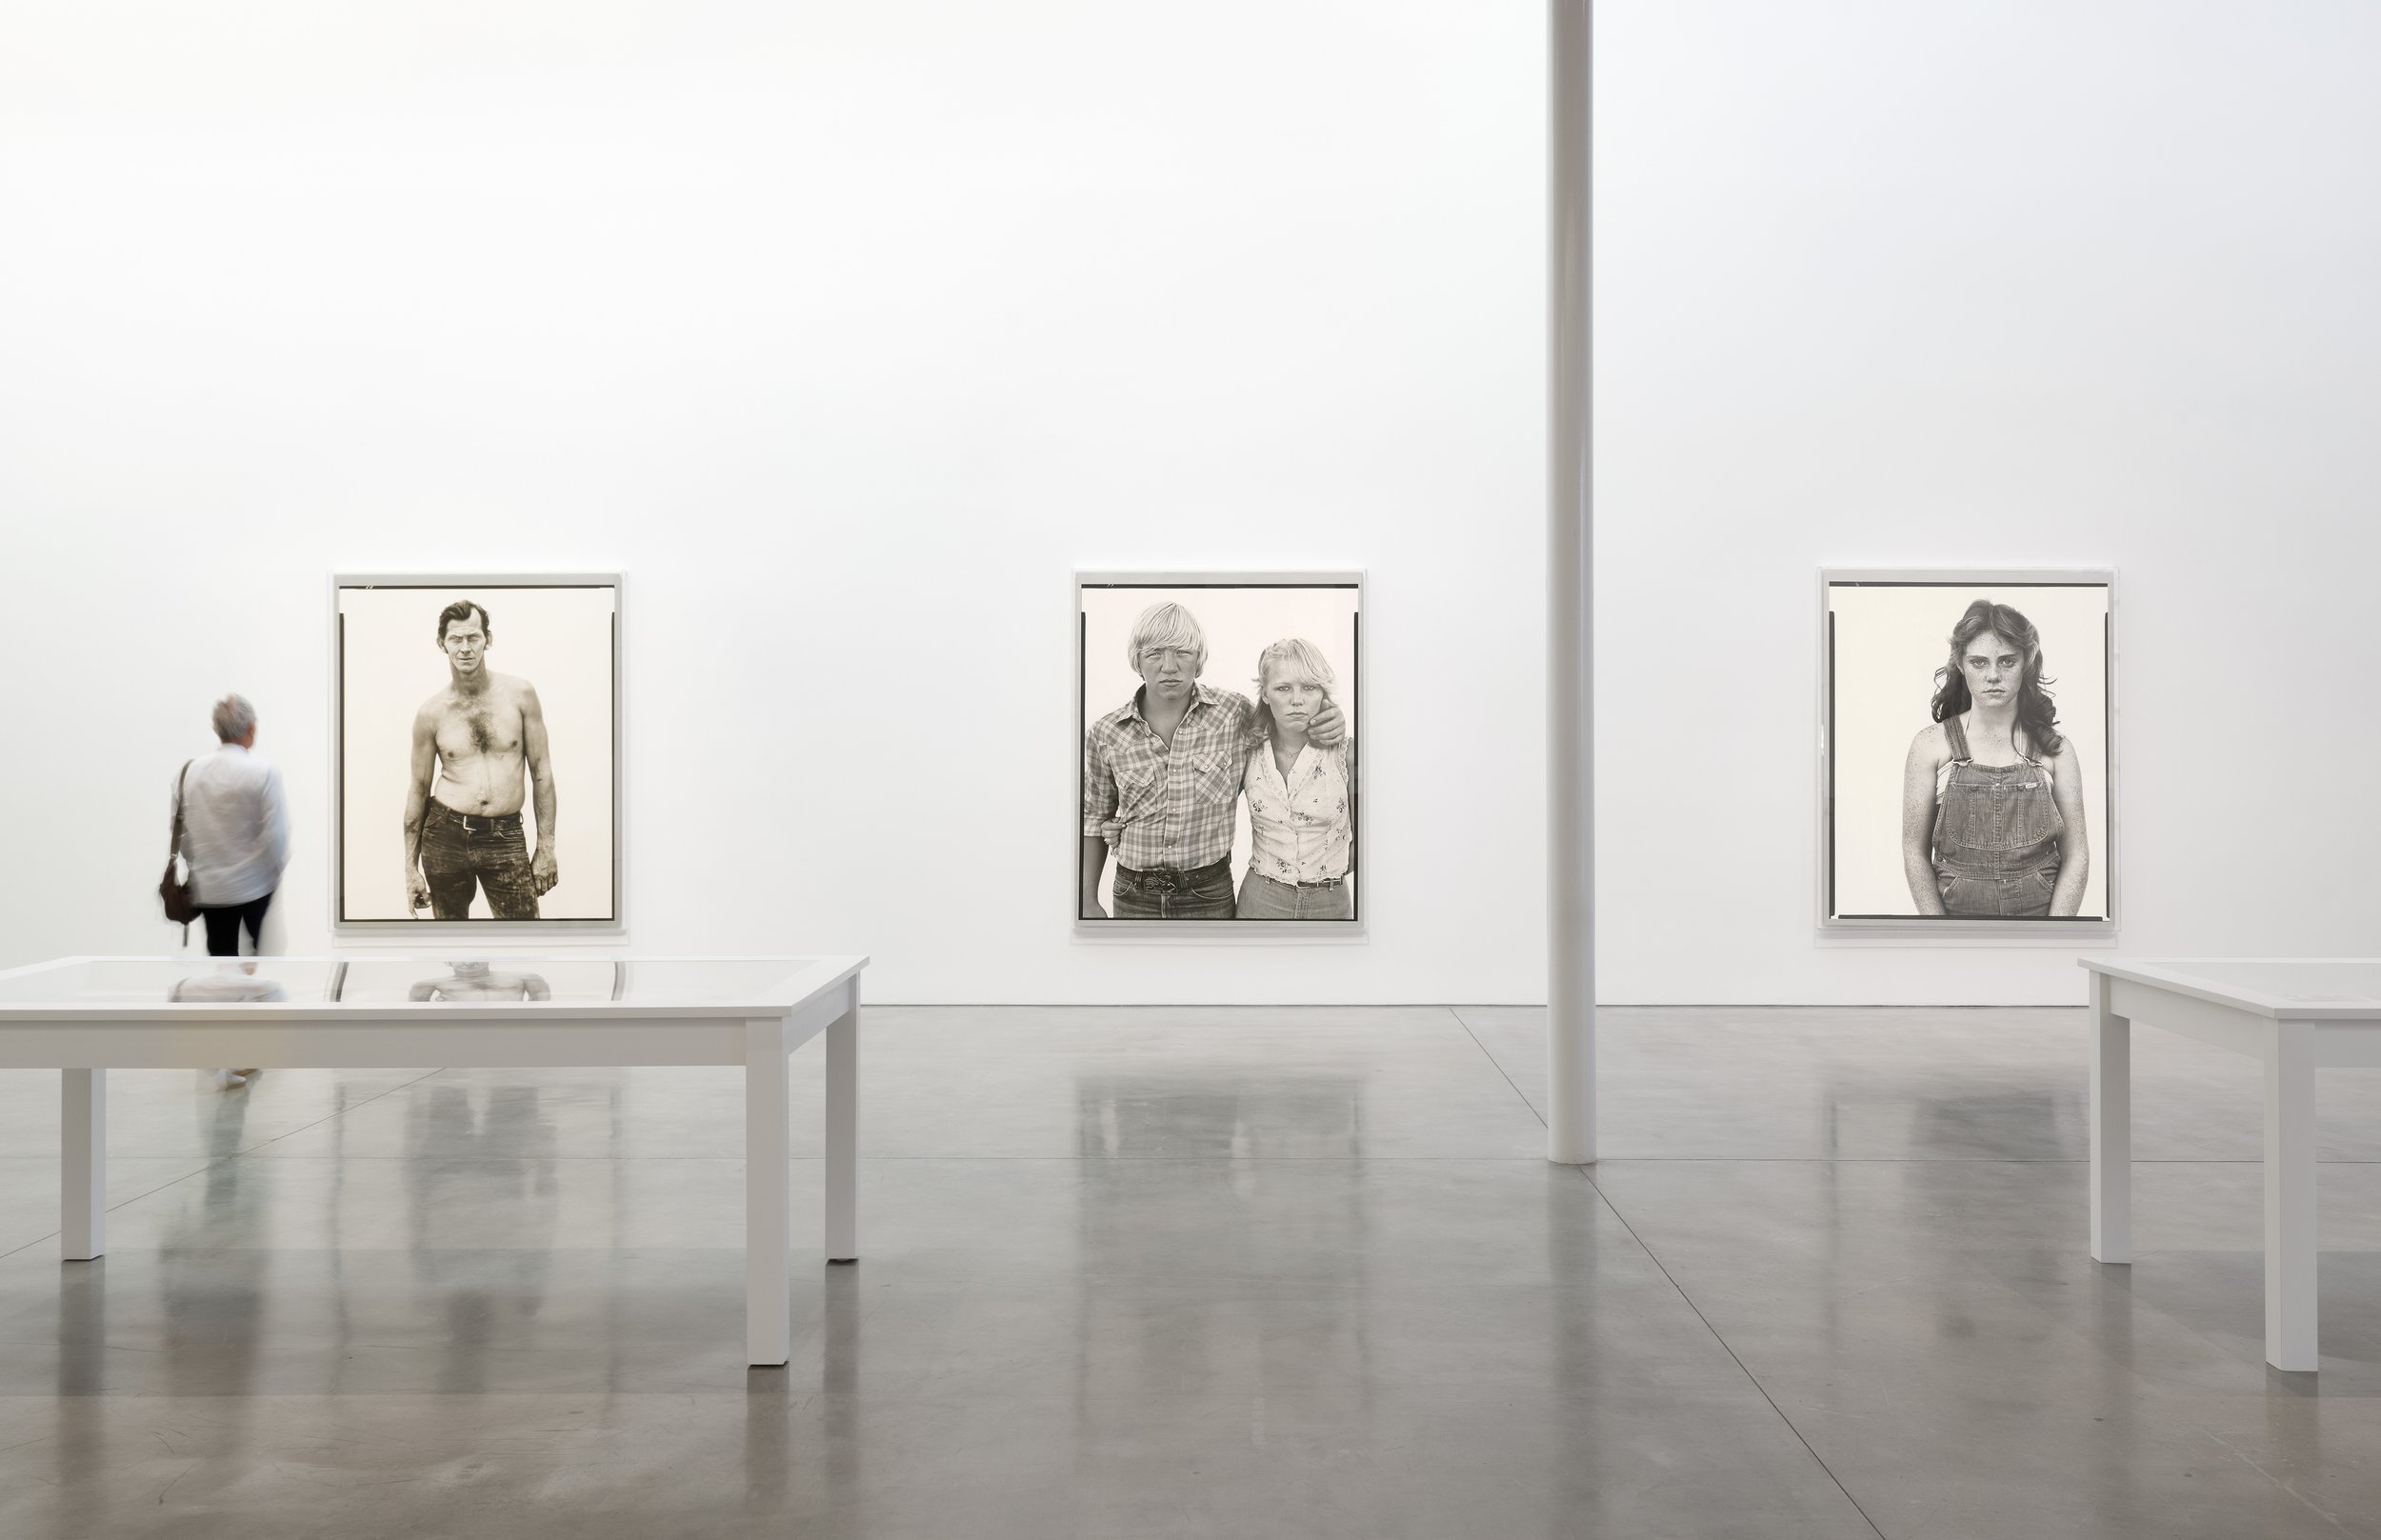  Richard Avedon, Ten Exhibition Prints from  In the American West , installation view, 2021 © The Richard Avedon Foundation, photo by Jeff McLane, courtesy Gagosian. 